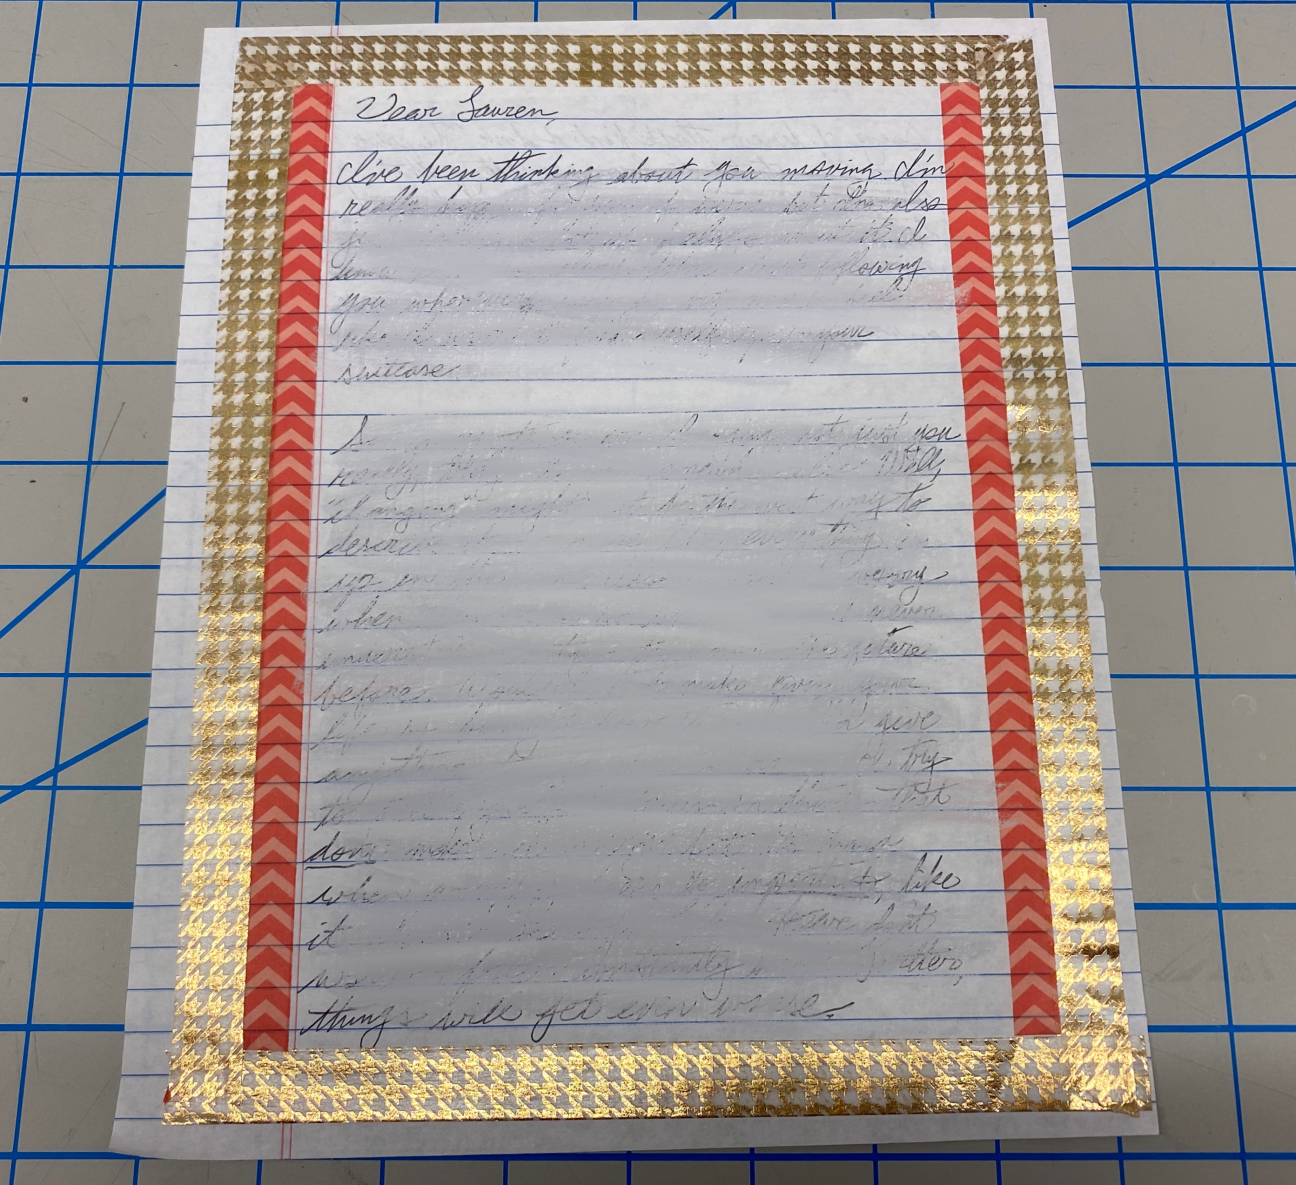 A blurred-out letter, with a washi tape border, on traditional lined paper.